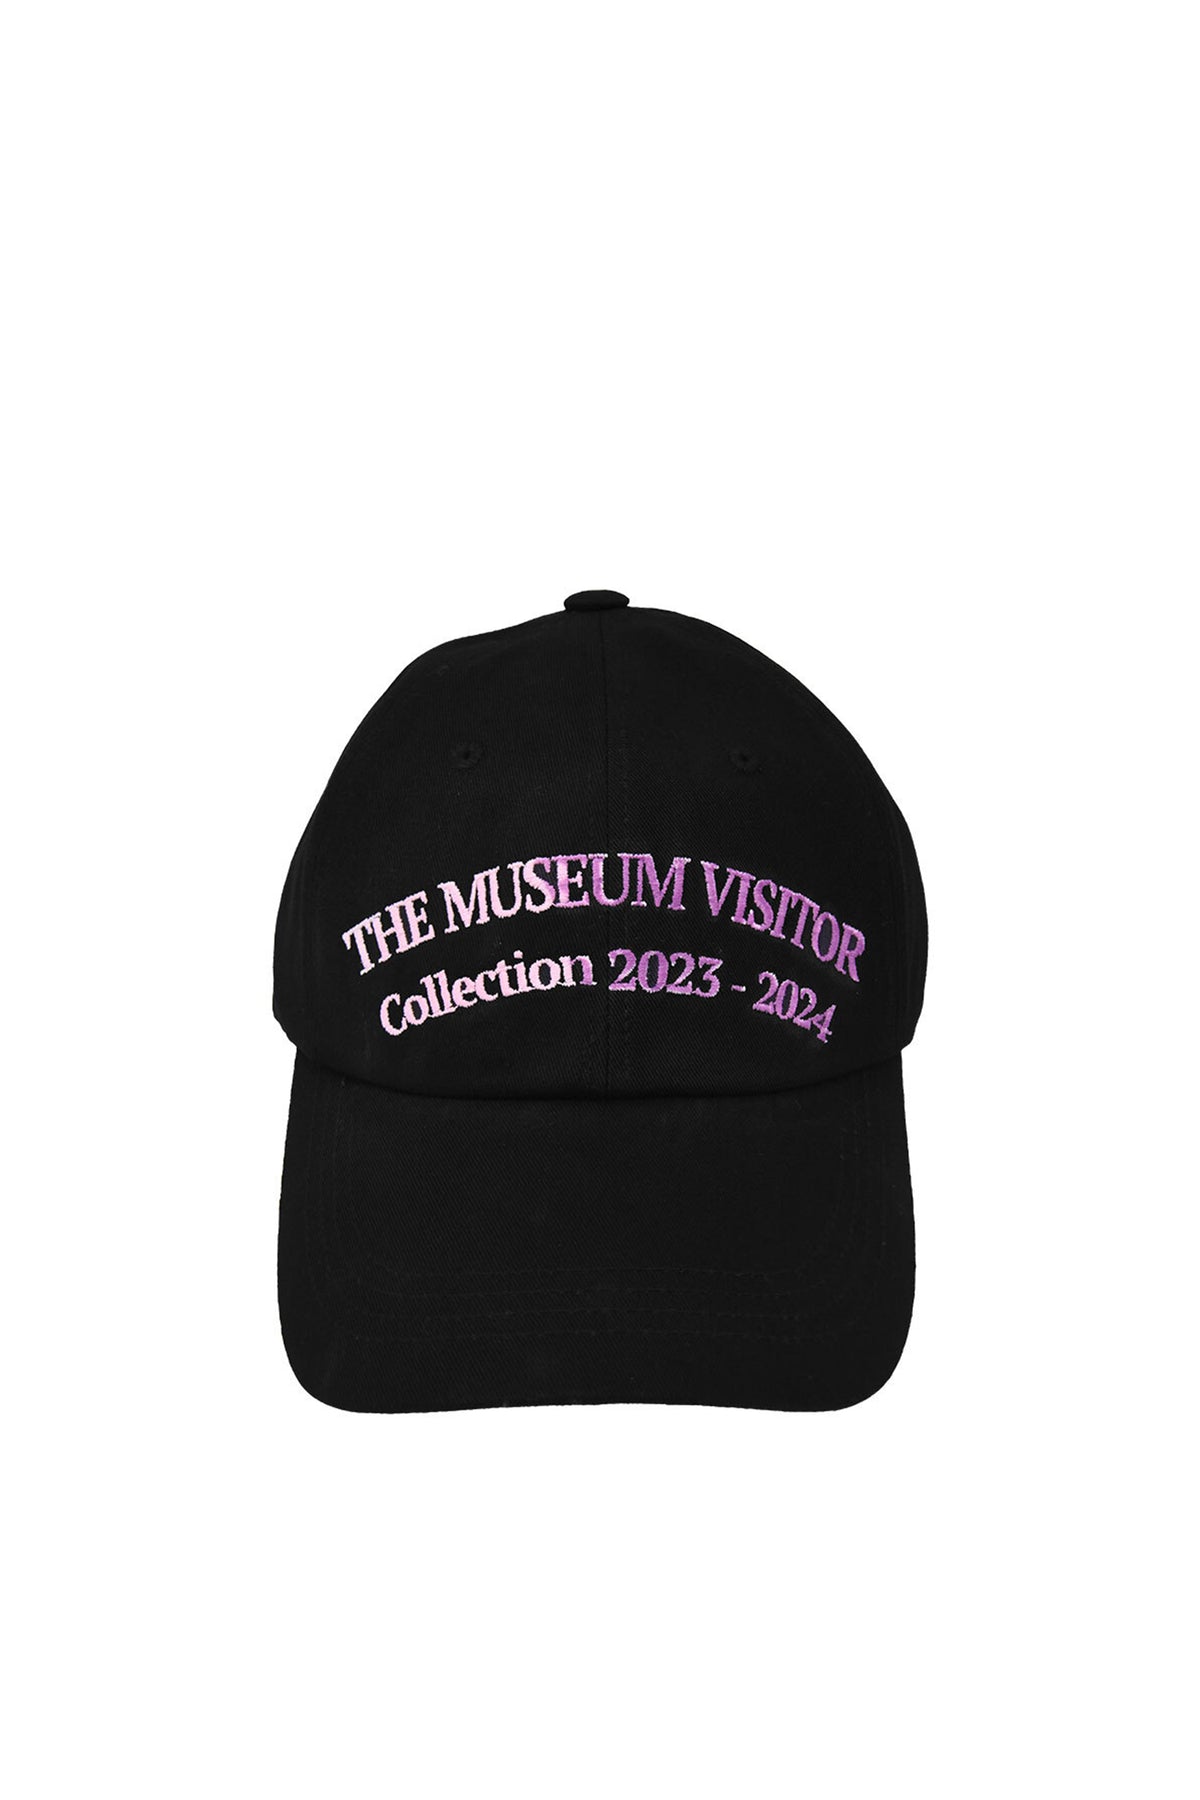 THE MUSEUM VISITOR COLLECTION 2023-2024 SPRAYED BALL CAP / BLK